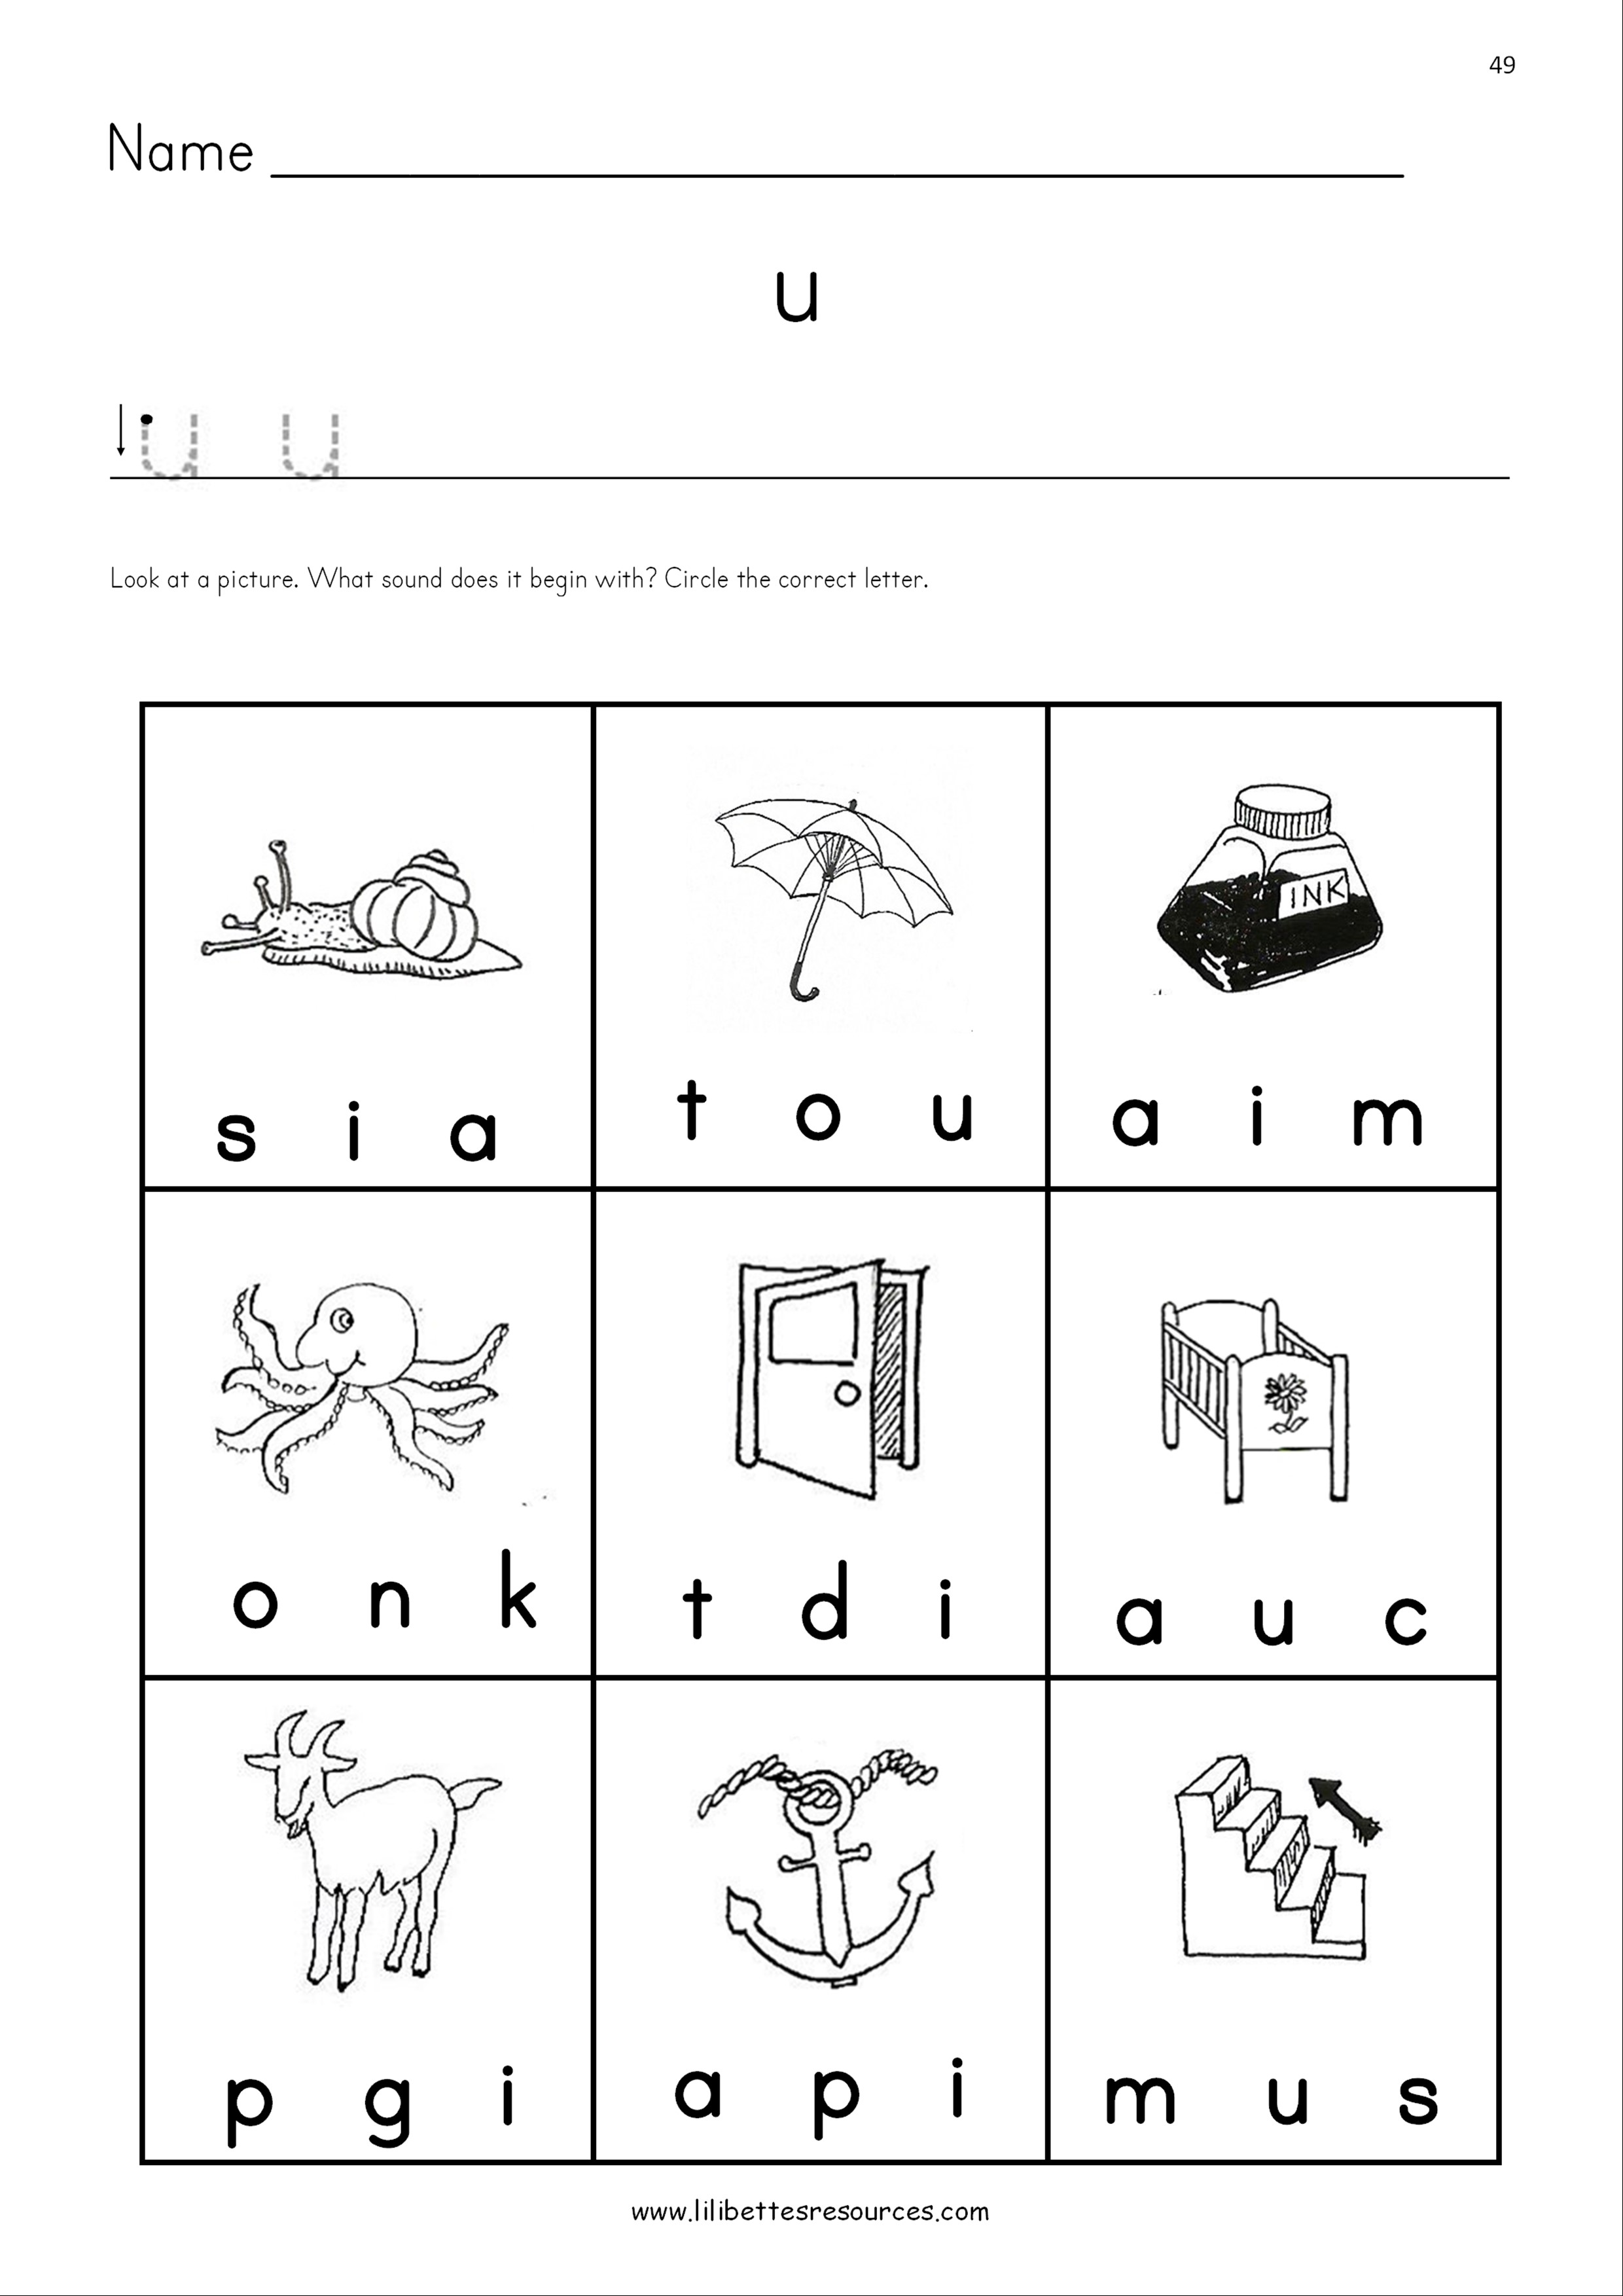 Initial sounds worksheets - Sound-it-out Phonics